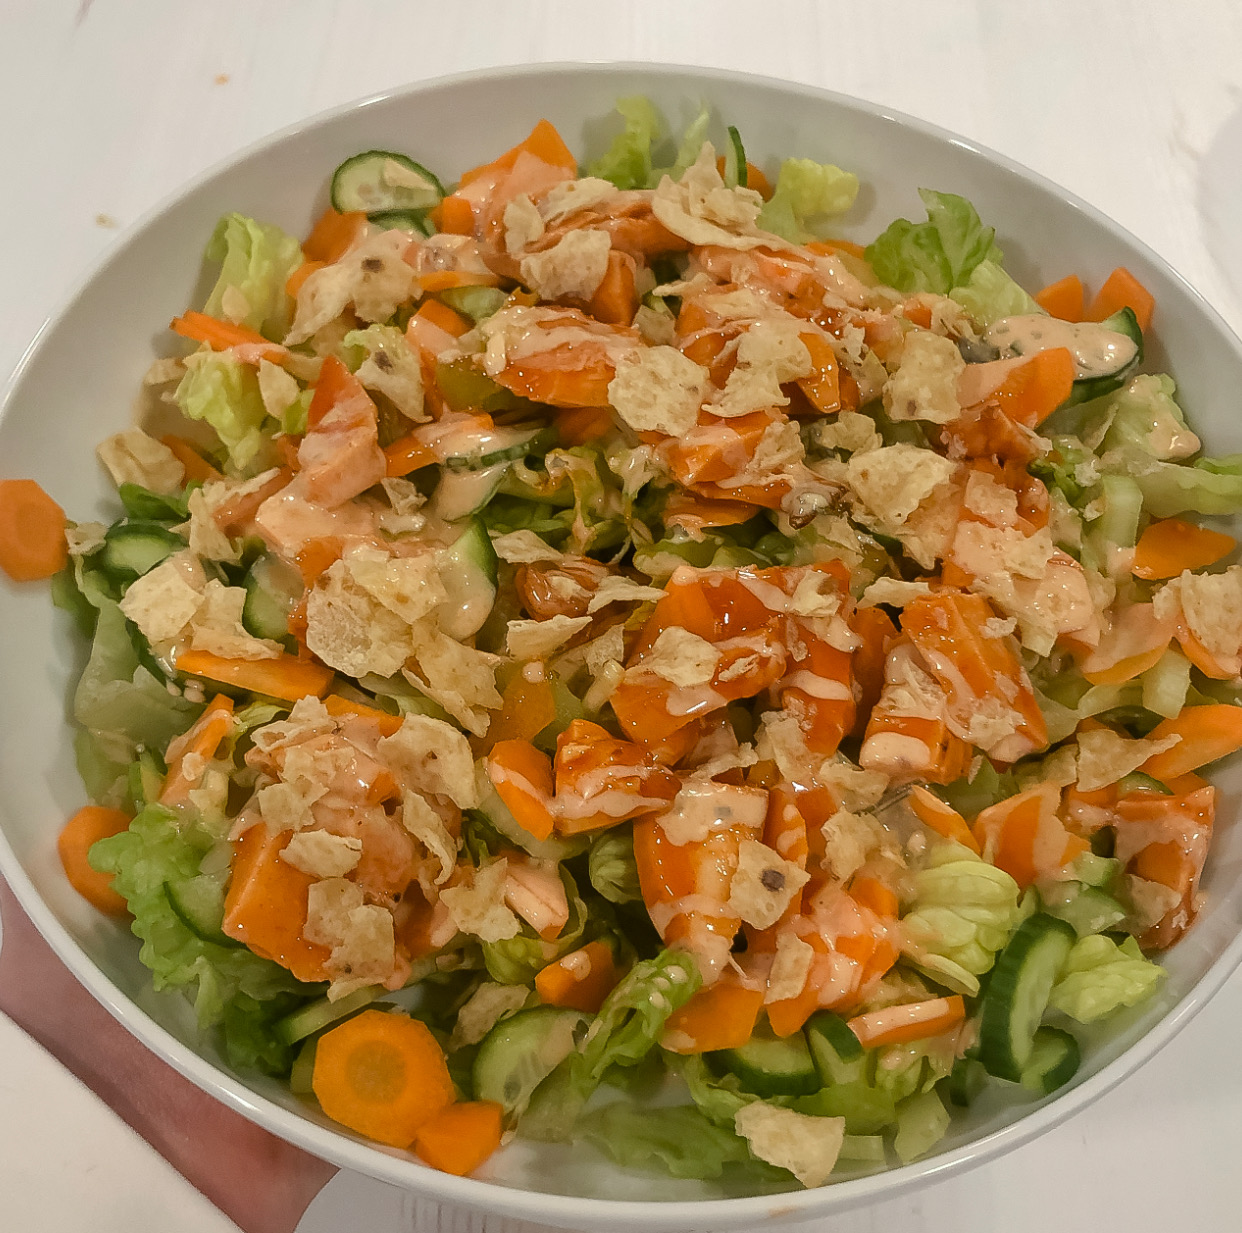 The finished buffalo chicken salad with spicy ranch dressing